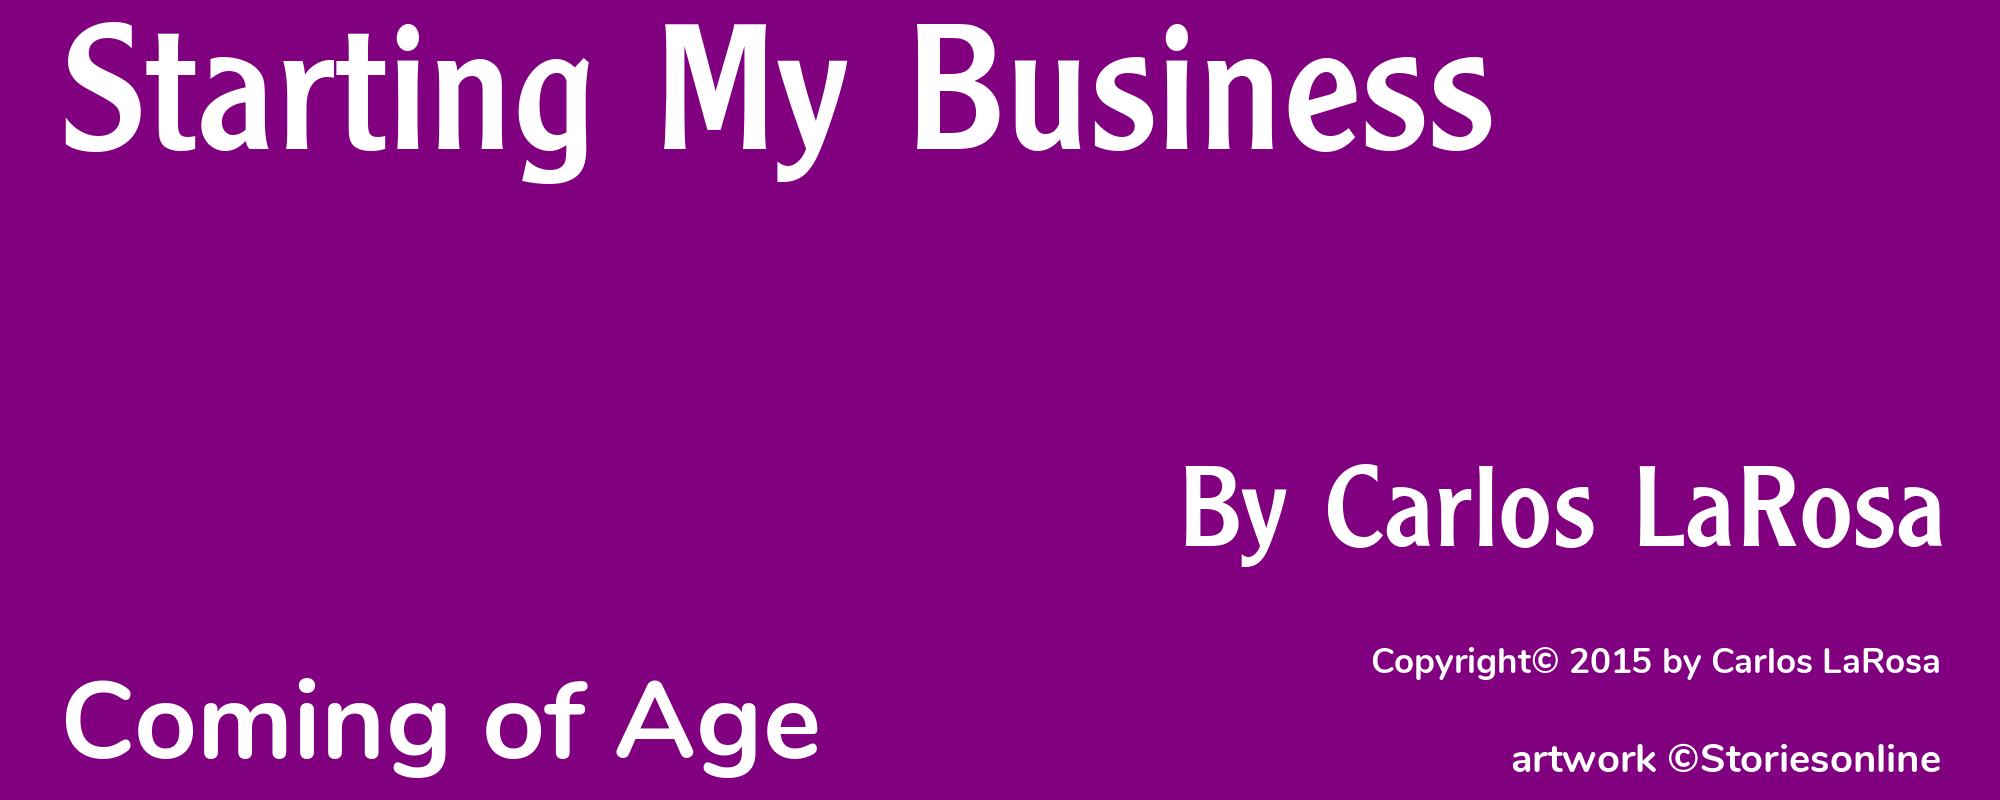 Starting My Business - Cover